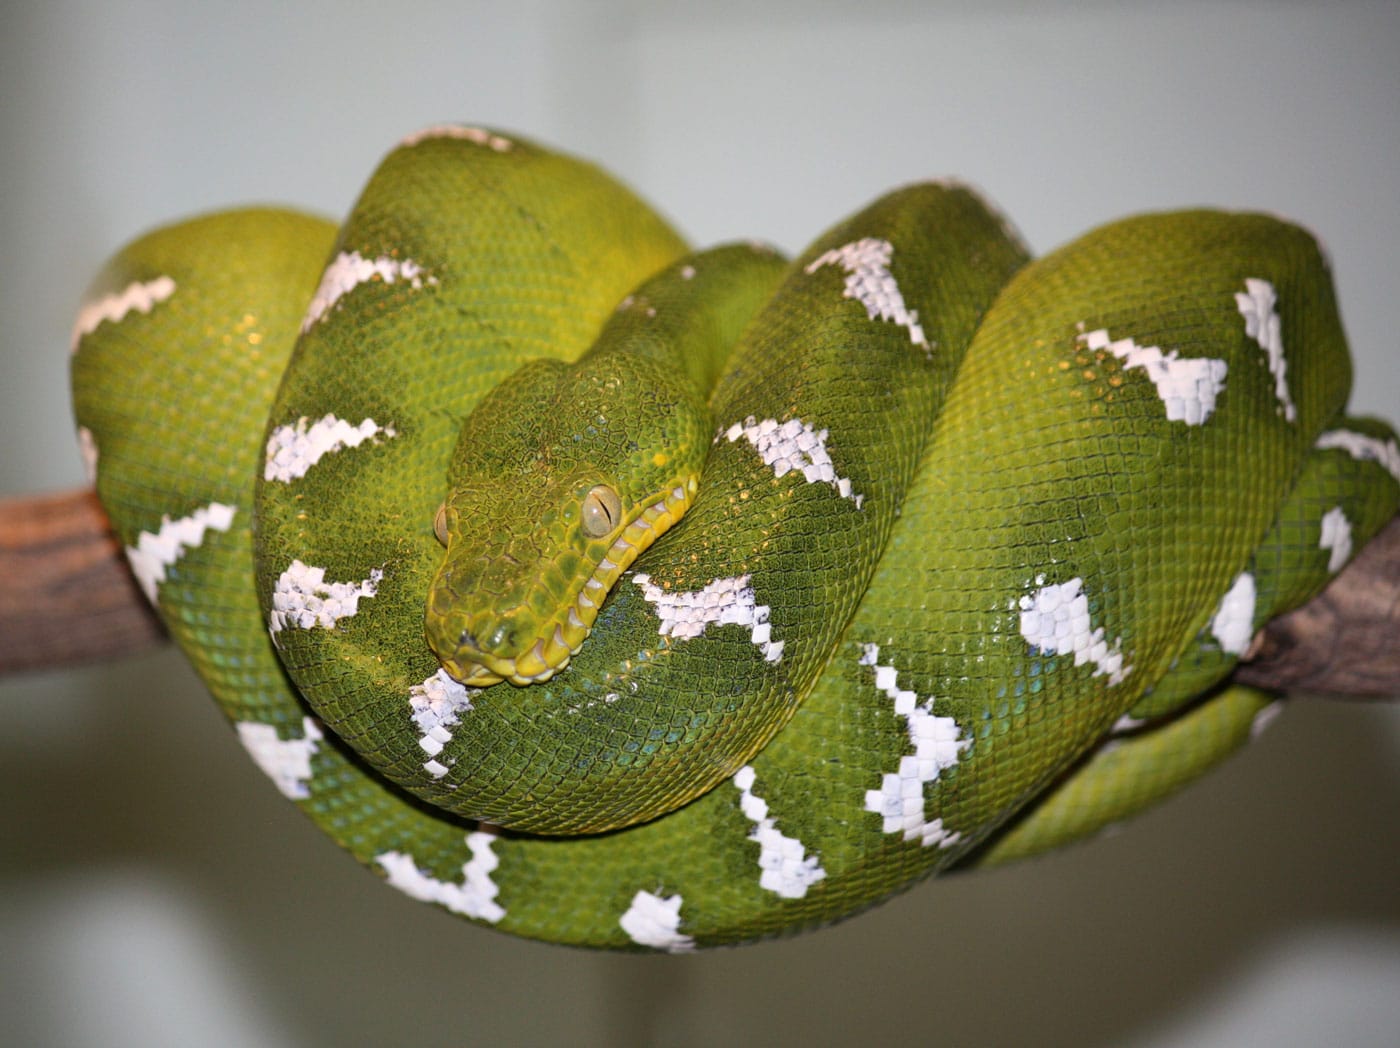 Emerald tree boas do not need light to catch their prey. They have heat  receptors that can sense nearby a…